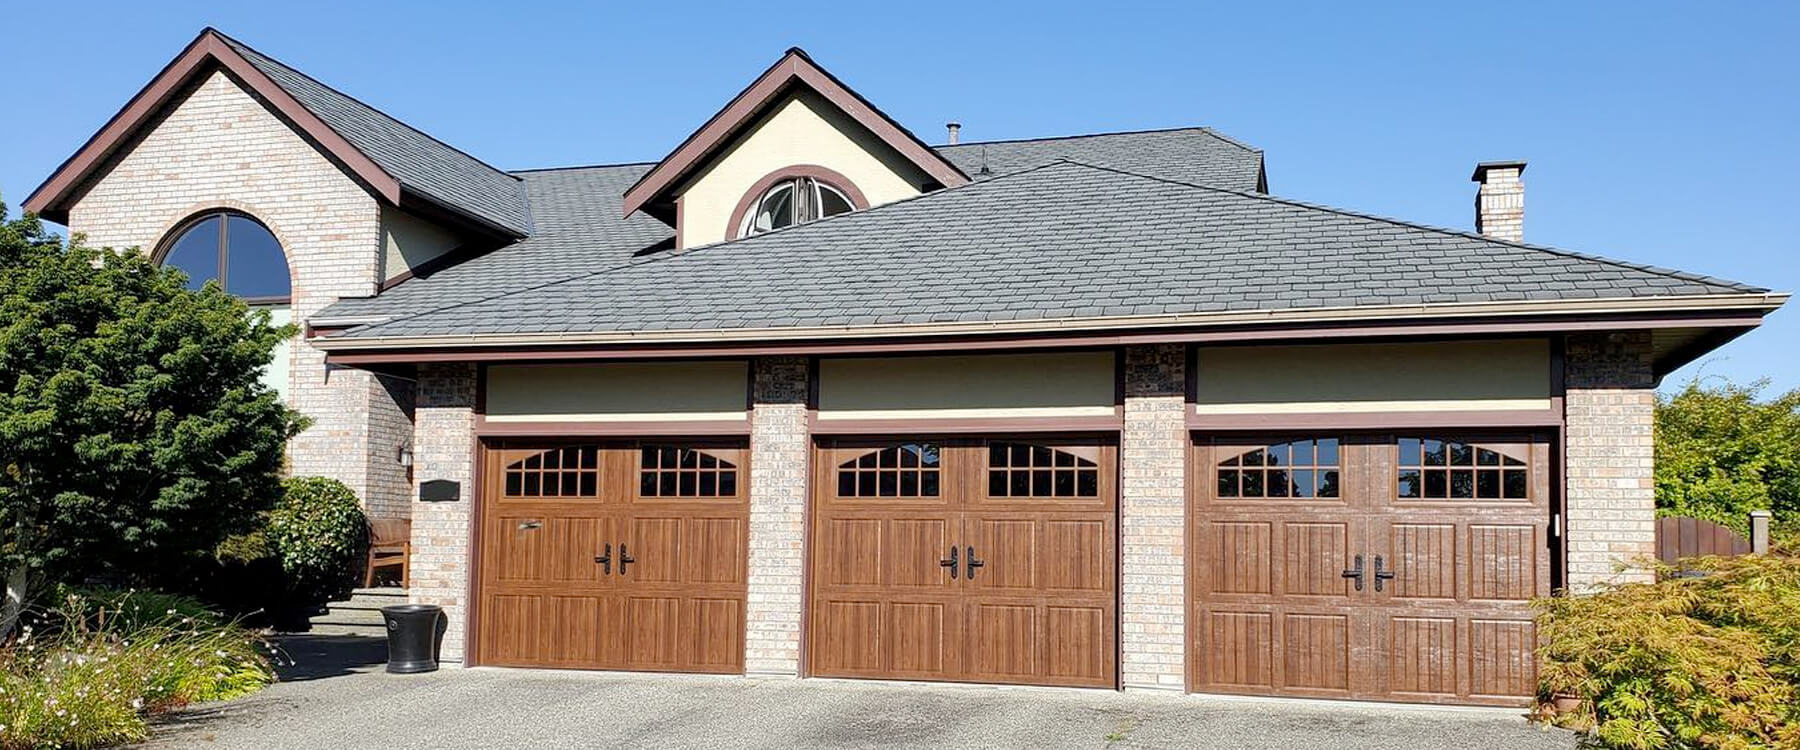 How to Choose the Right Size Garage Door for Your Home